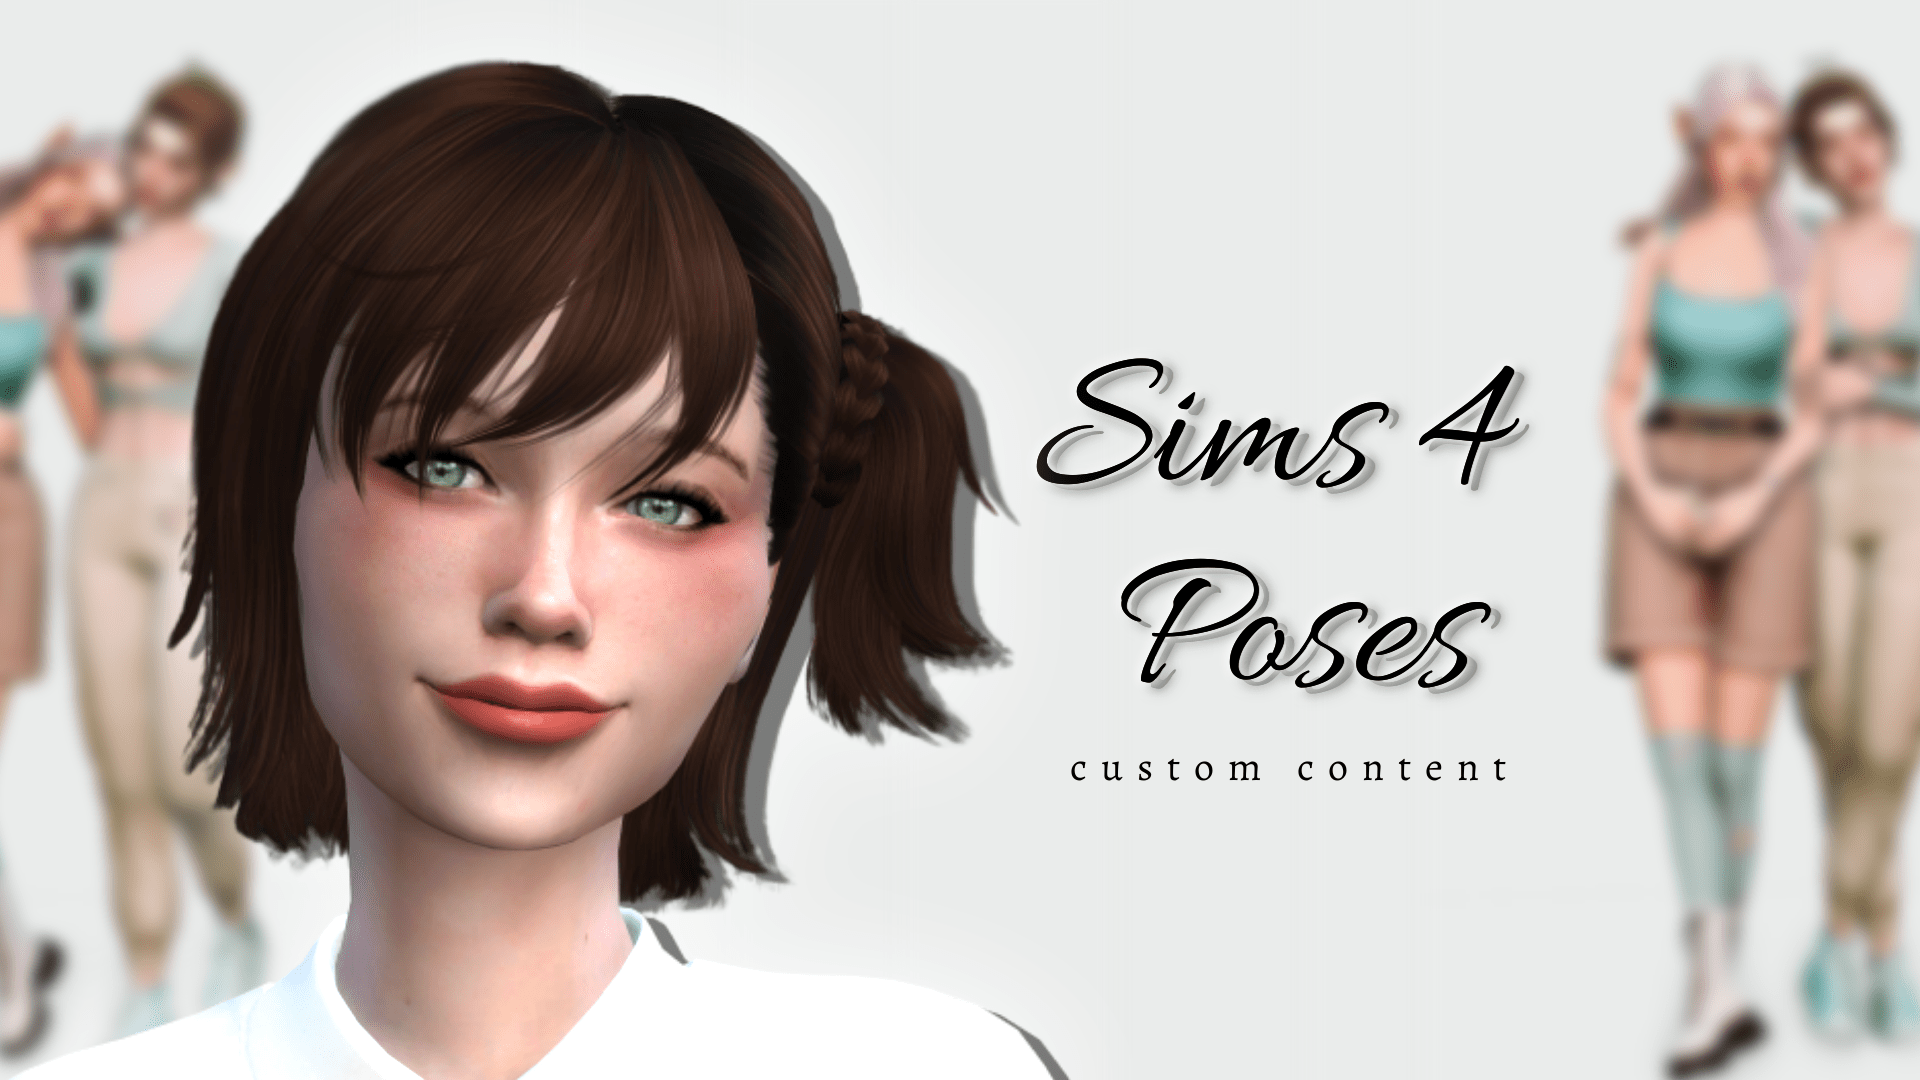 A 4 in 1 cute anime pose pack for andrew's pose player